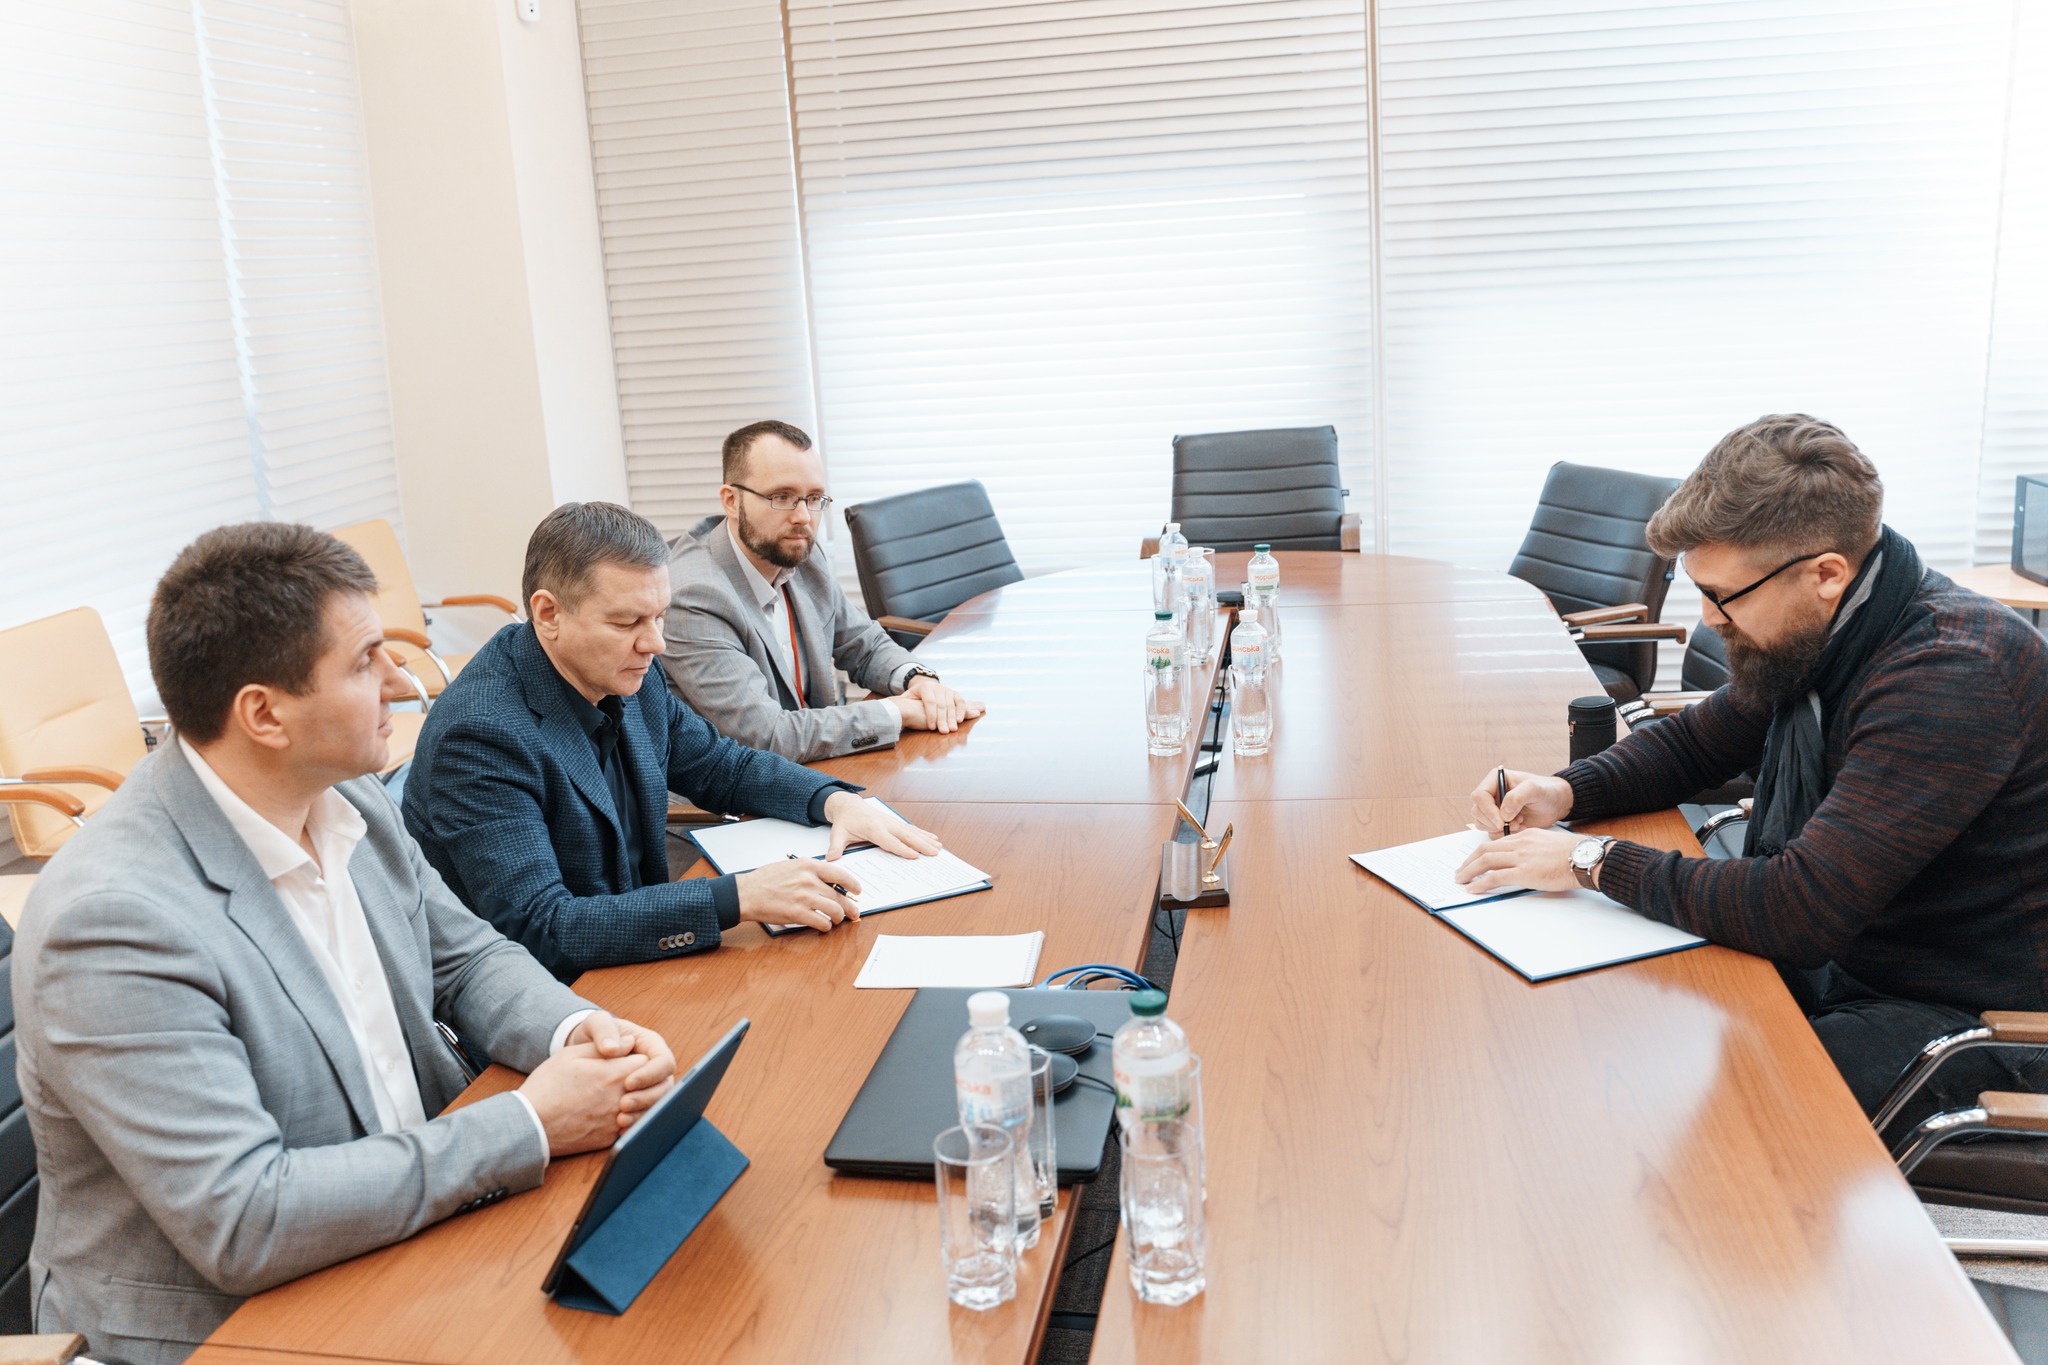 A Memorandum of Cooperation was signed between the Vinnytsia City Council and “Firewood” LLC